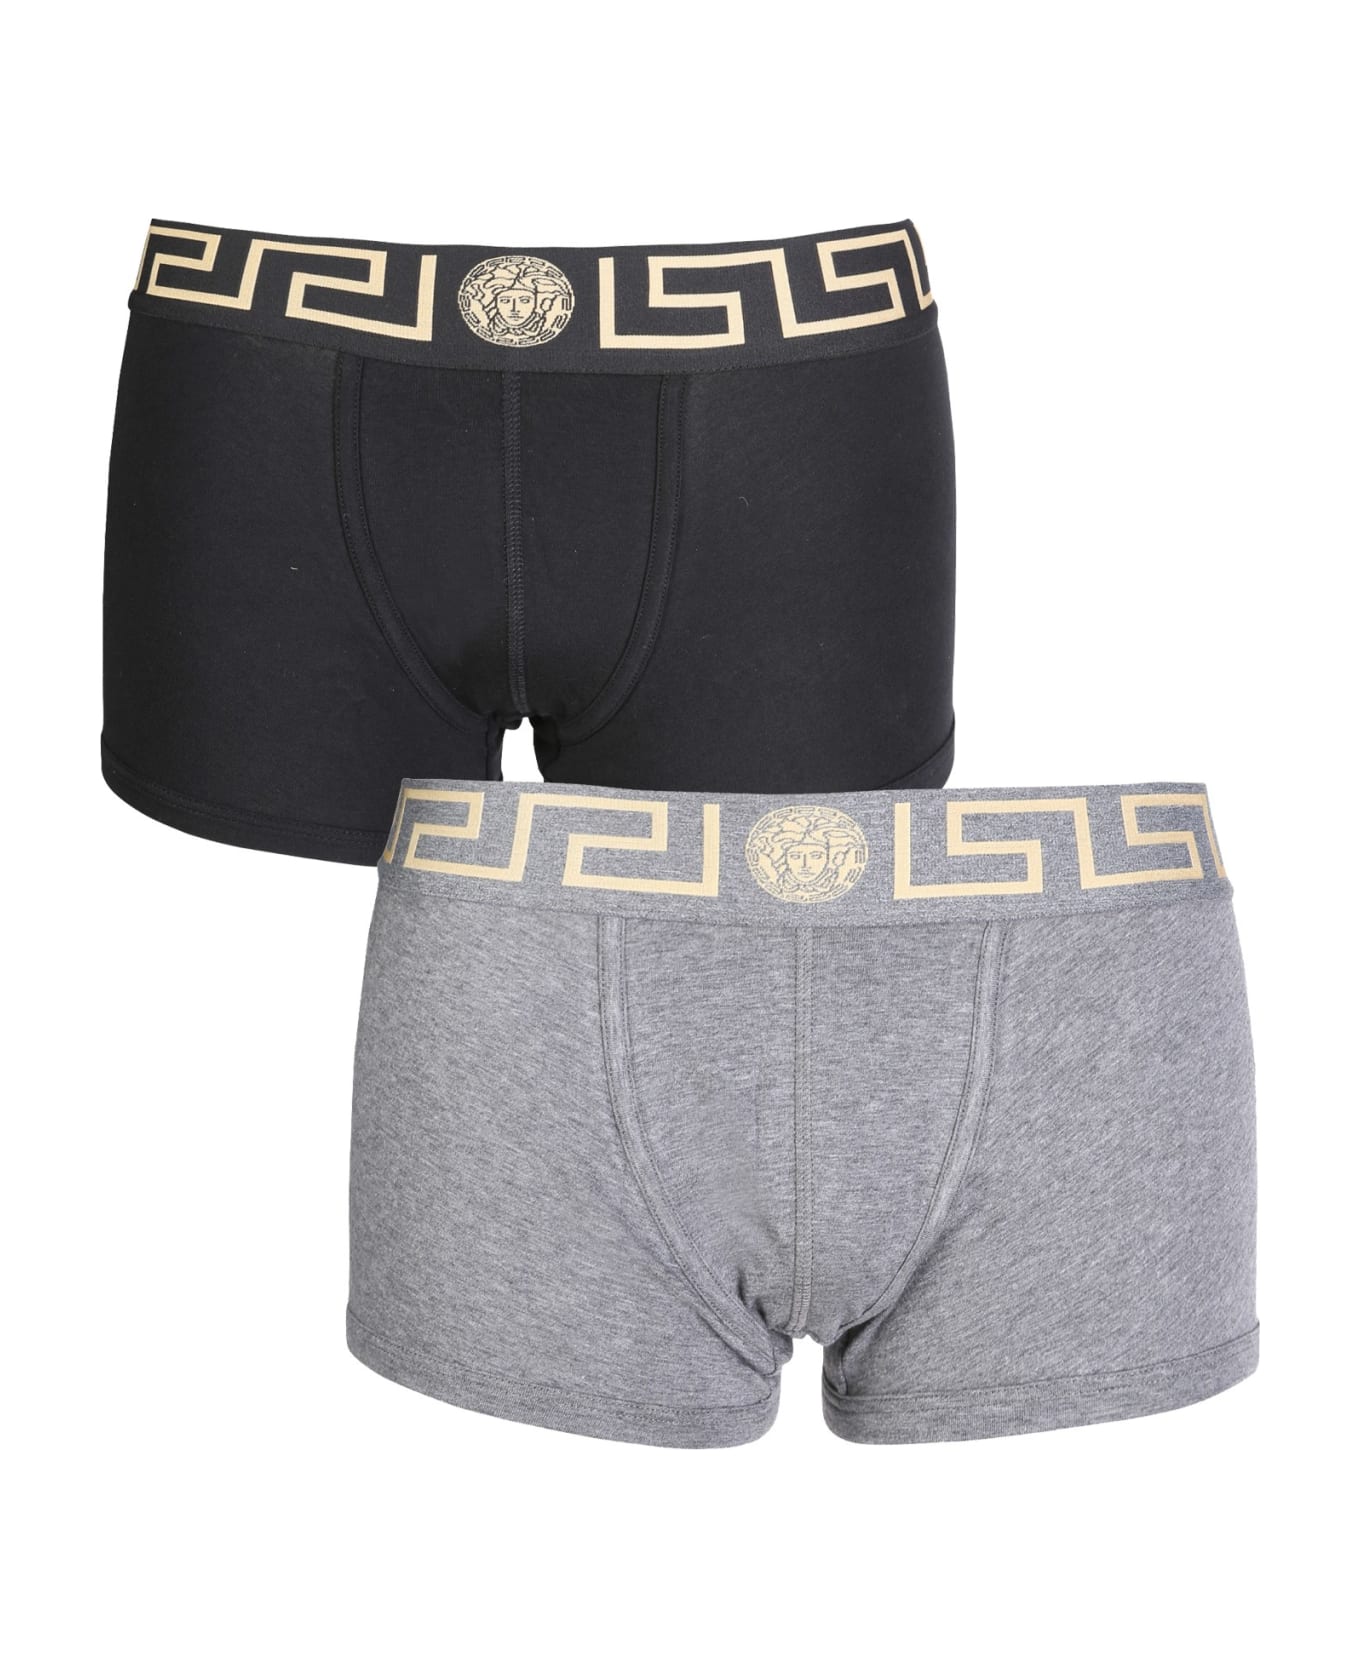 Versace Pack Of Two Boxer Shorts With Greek - NERO GRIGIO ショーツ